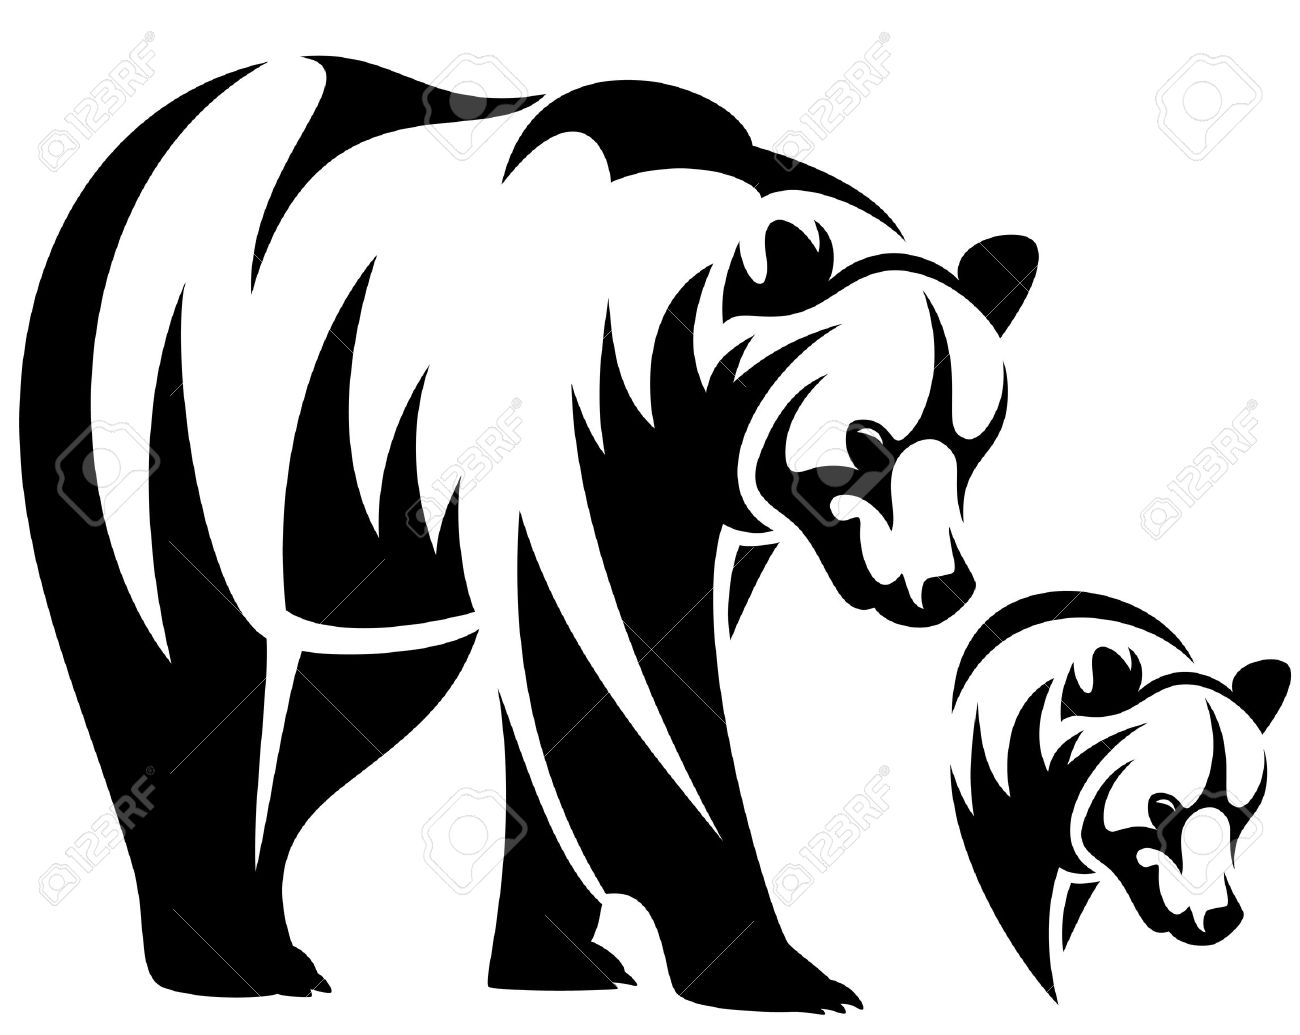 Walking Bear And Animal Head Black And White Outline Emblem.